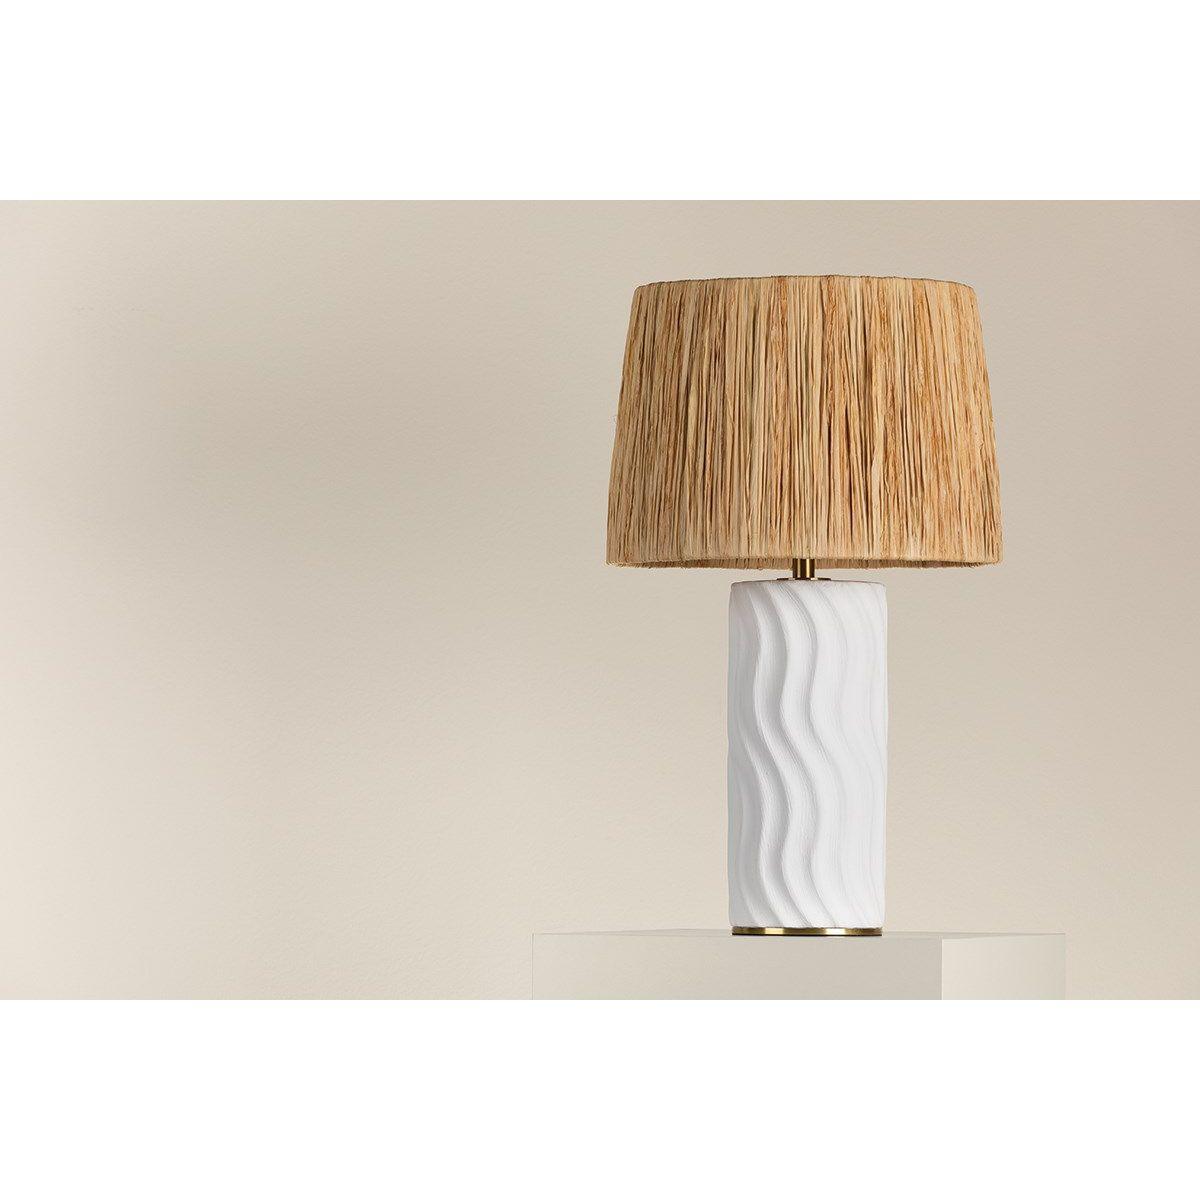 Daniella Table Lamp Ceramic White Wash with Aged Brass Accents